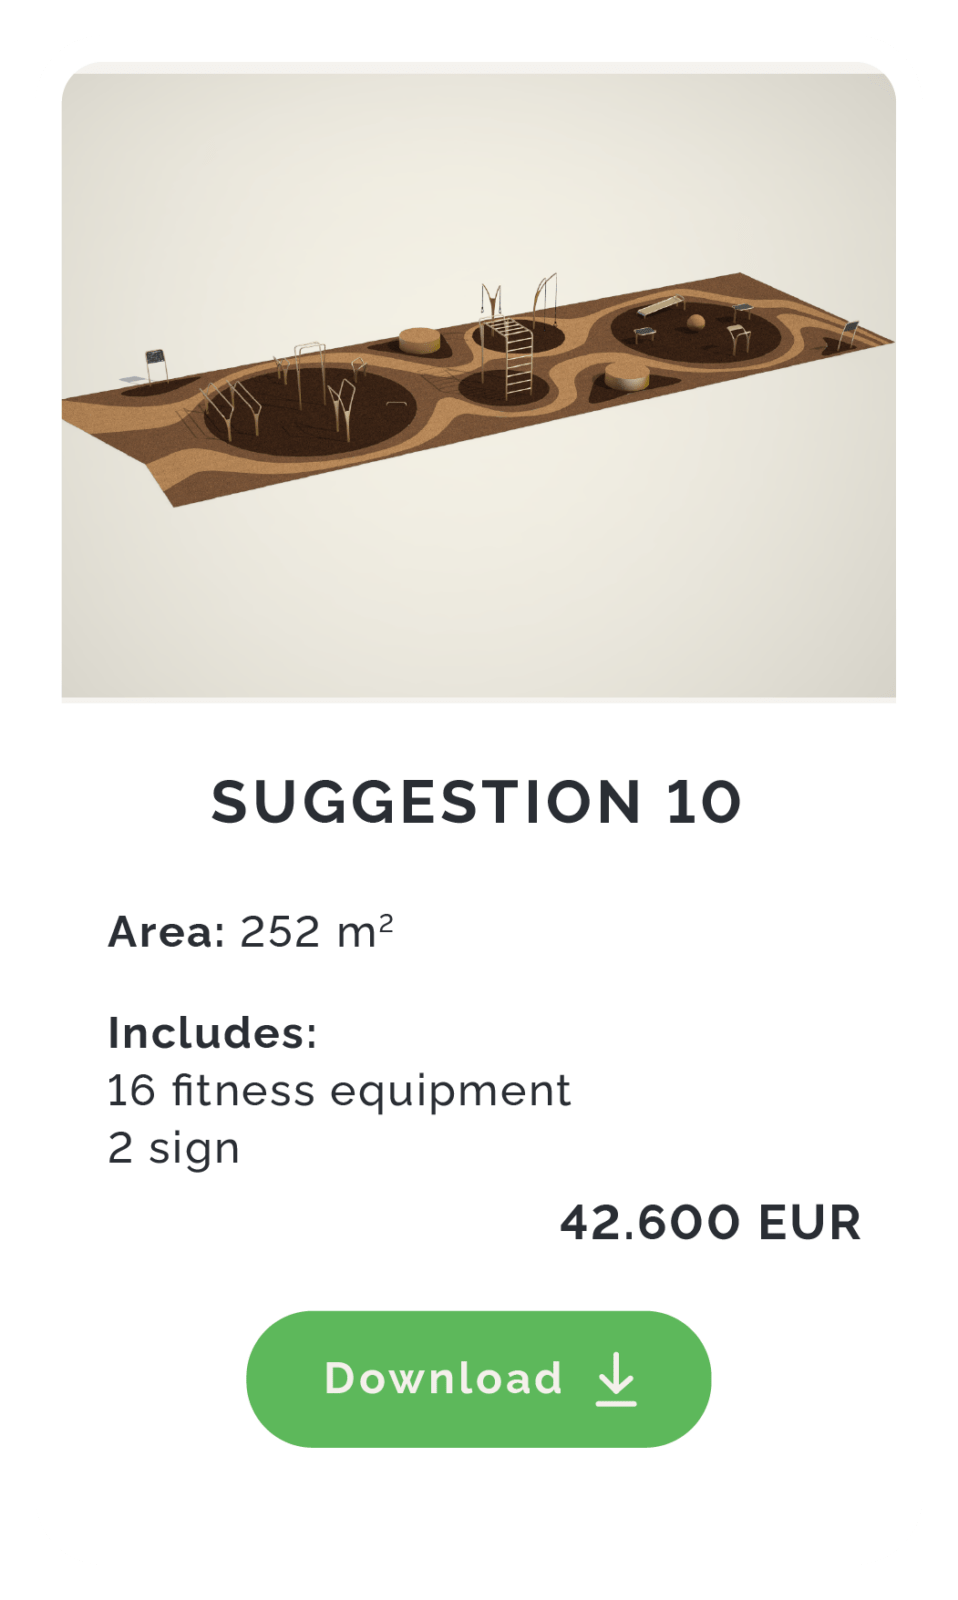 Installation suggestion for workout activity area made for people to stay active